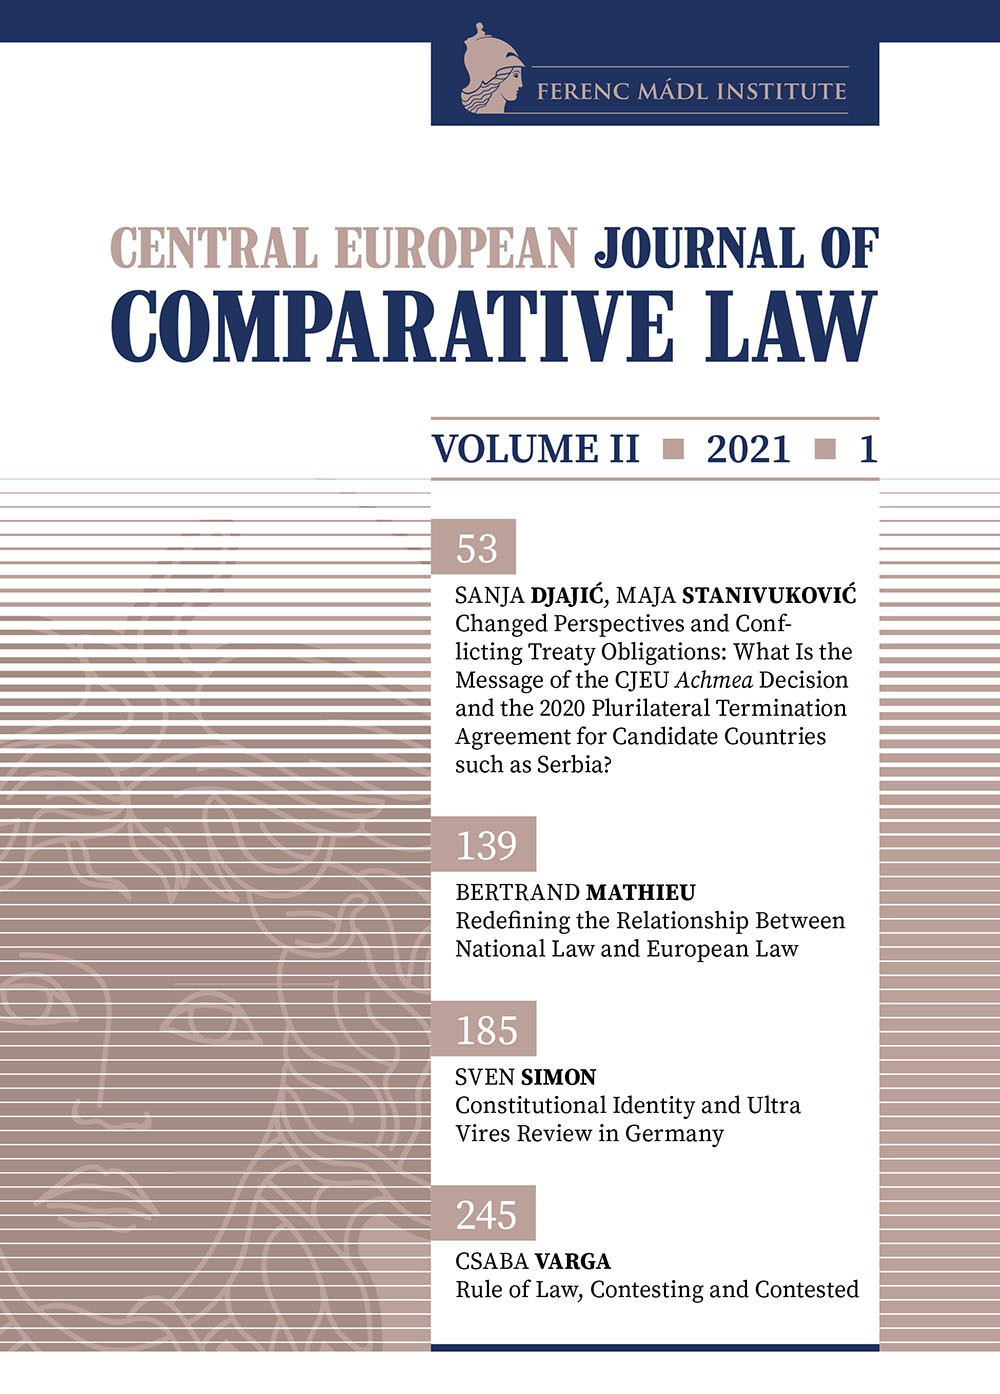 Redefining the Relationship Between National Law and European Law